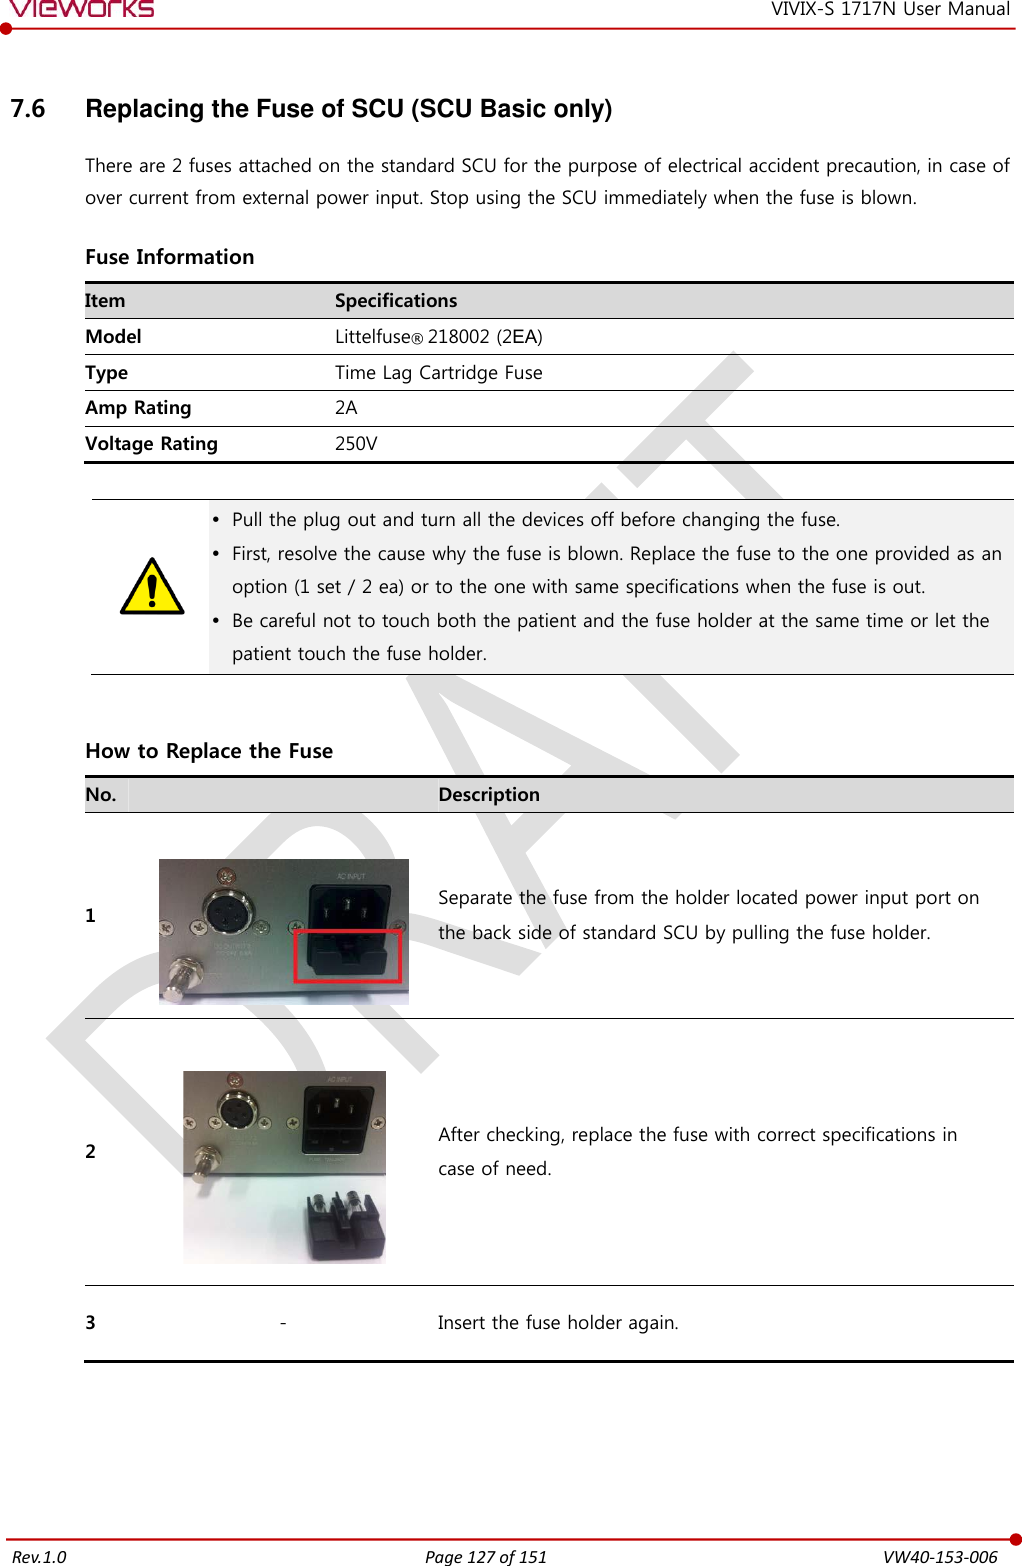   Rev.1.0 Page 127 of 151  VW40-153-006 VIVIX-S 1717N User Manual 7.6  Replacing the Fuse of SCU (SCU Basic only) There are 2 fuses attached on the standard SCU for the purpose of electrical accident precaution, in case of over current from external power input. Stop using the SCU immediately when the fuse is blown.  Fuse Information Item Specifications Model Littelfuse® 218002 (2EA) Type Time Lag Cartridge Fuse Amp Rating 2A Voltage Rating 250V    Pull the plug out and turn all the devices off before changing the fuse.  First, resolve the cause why the fuse is blown. Replace the fuse to the one provided as an option (1 set / 2 ea) or to the one with same specifications when the fuse is out.  Be careful not to touch both the patient and the fuse holder at the same time or let the patient touch the fuse holder.   How to Replace the Fuse No.  Description 1   Separate the fuse from the holder located power input port on   the back side of standard SCU by pulling the fuse holder. 2   After checking, replace the fuse with correct specifications in   case of need. 3 - Insert the fuse holder again.   